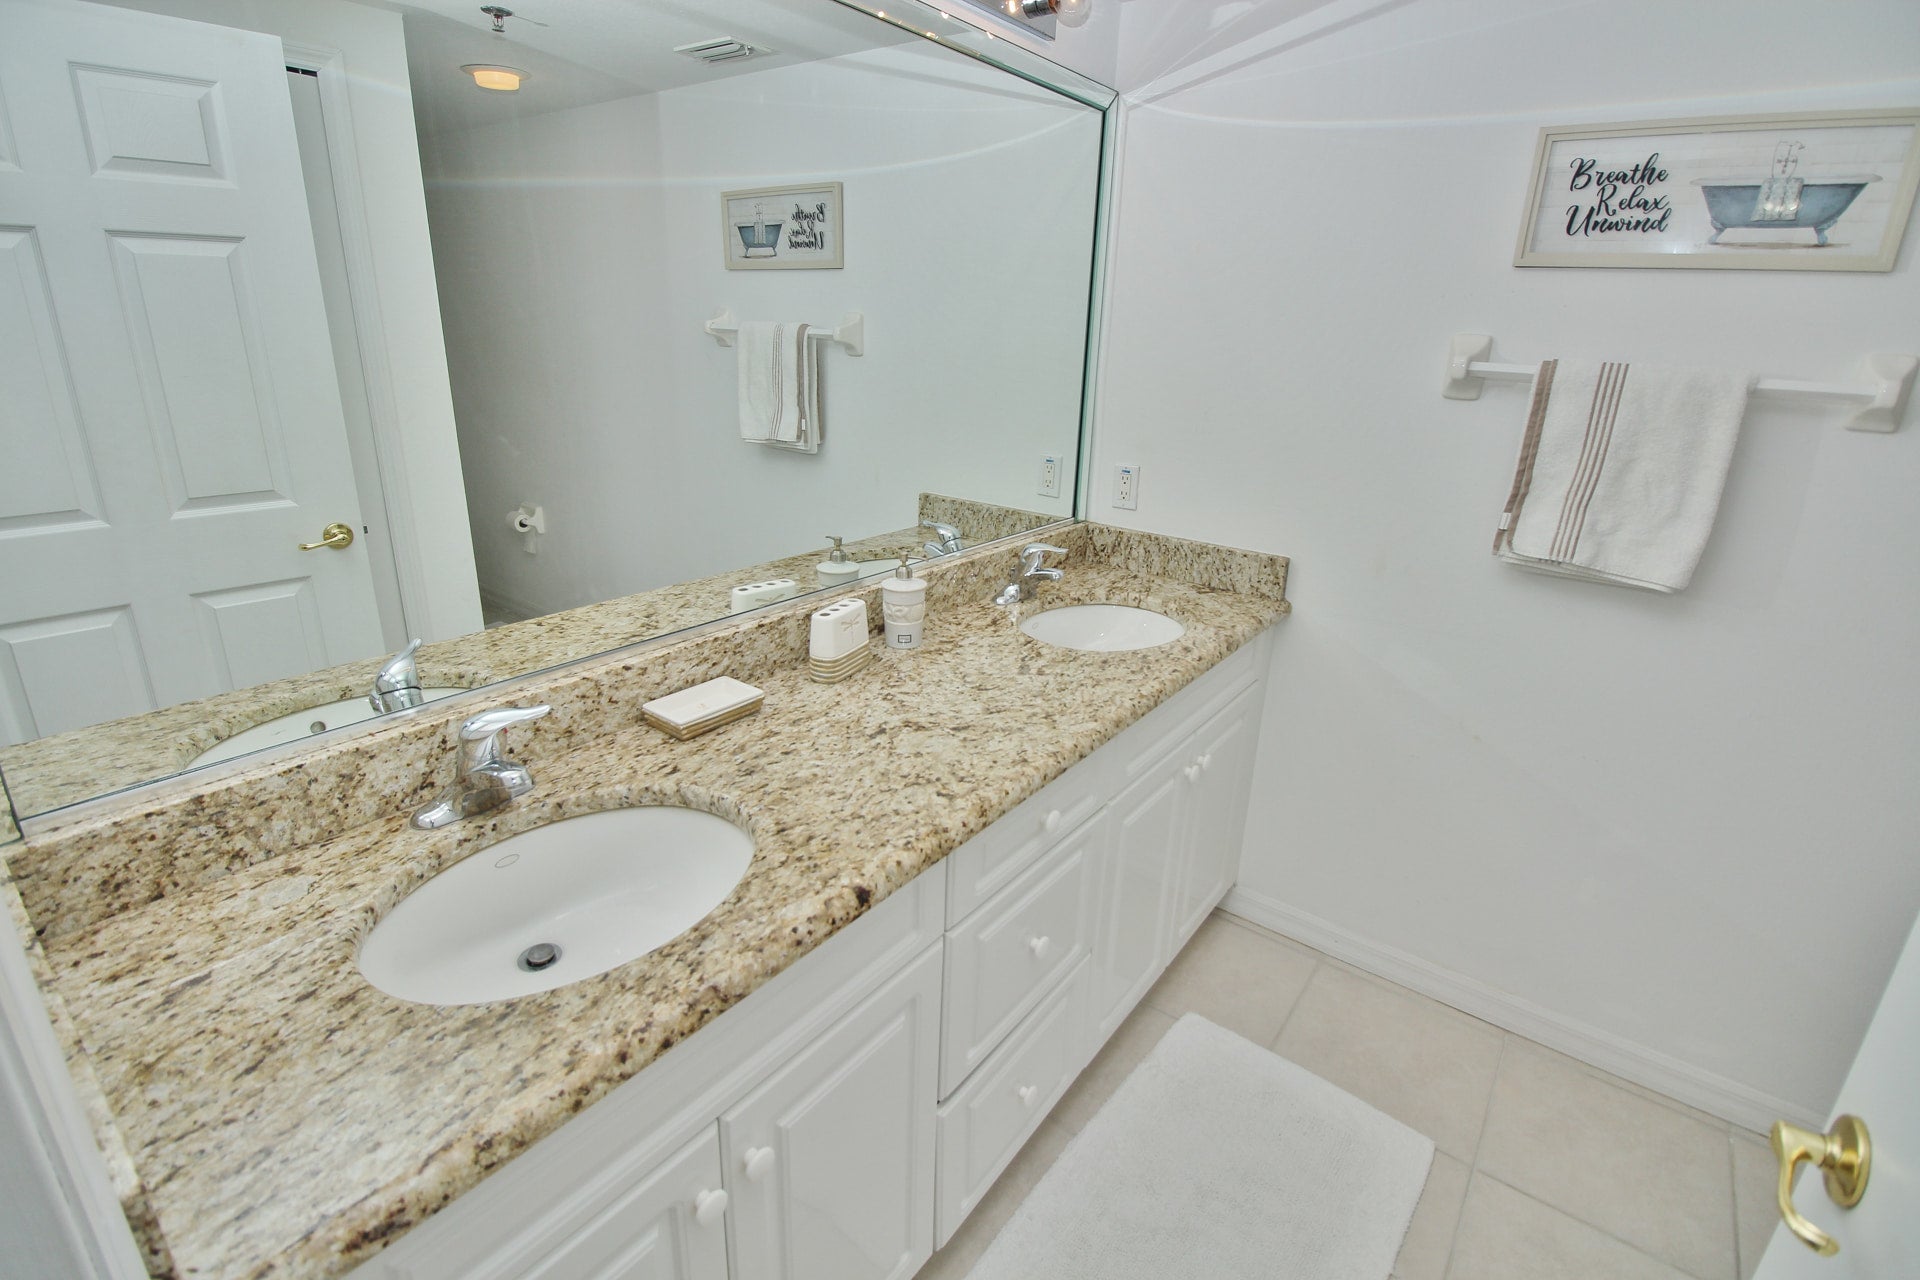 Double Sinks with Granite Counters